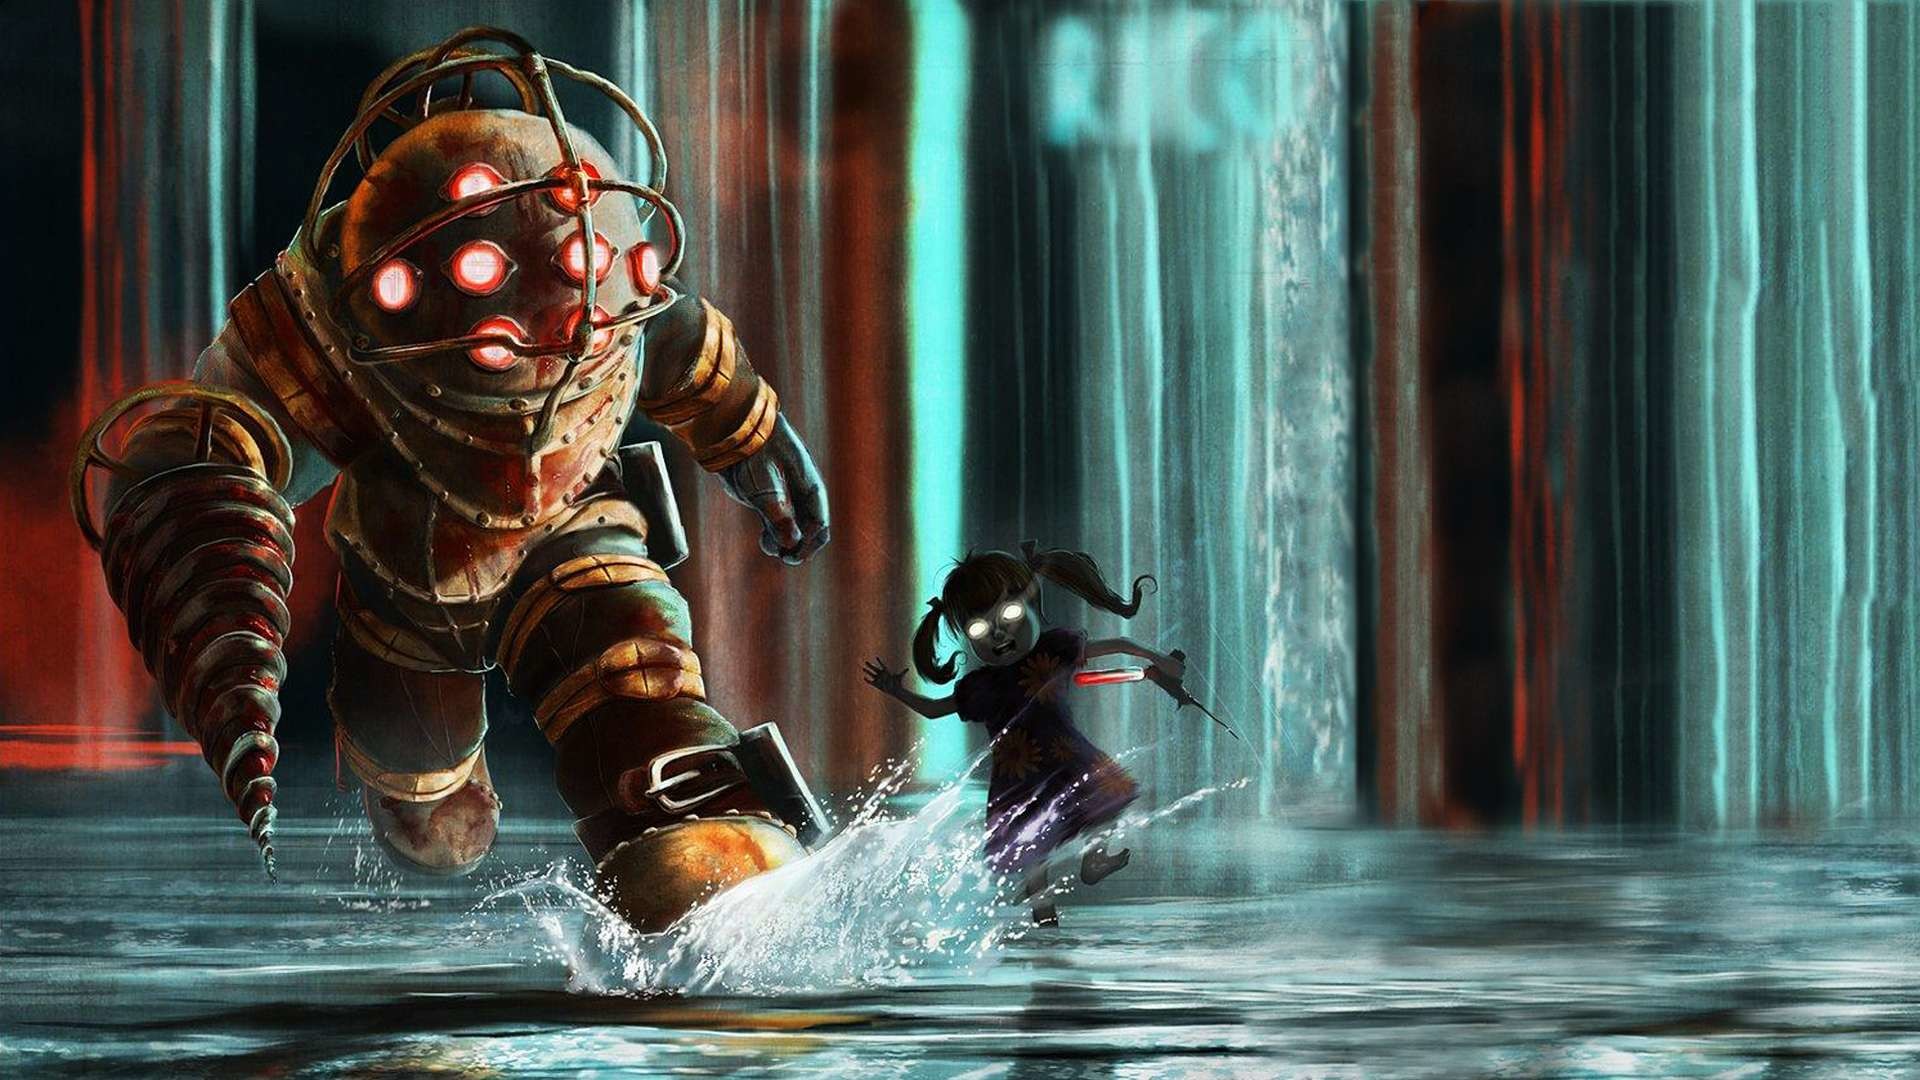 1920x1080 Bioshock 2 Wallpapers Picture : Games Wallpaper - Timmatic.com